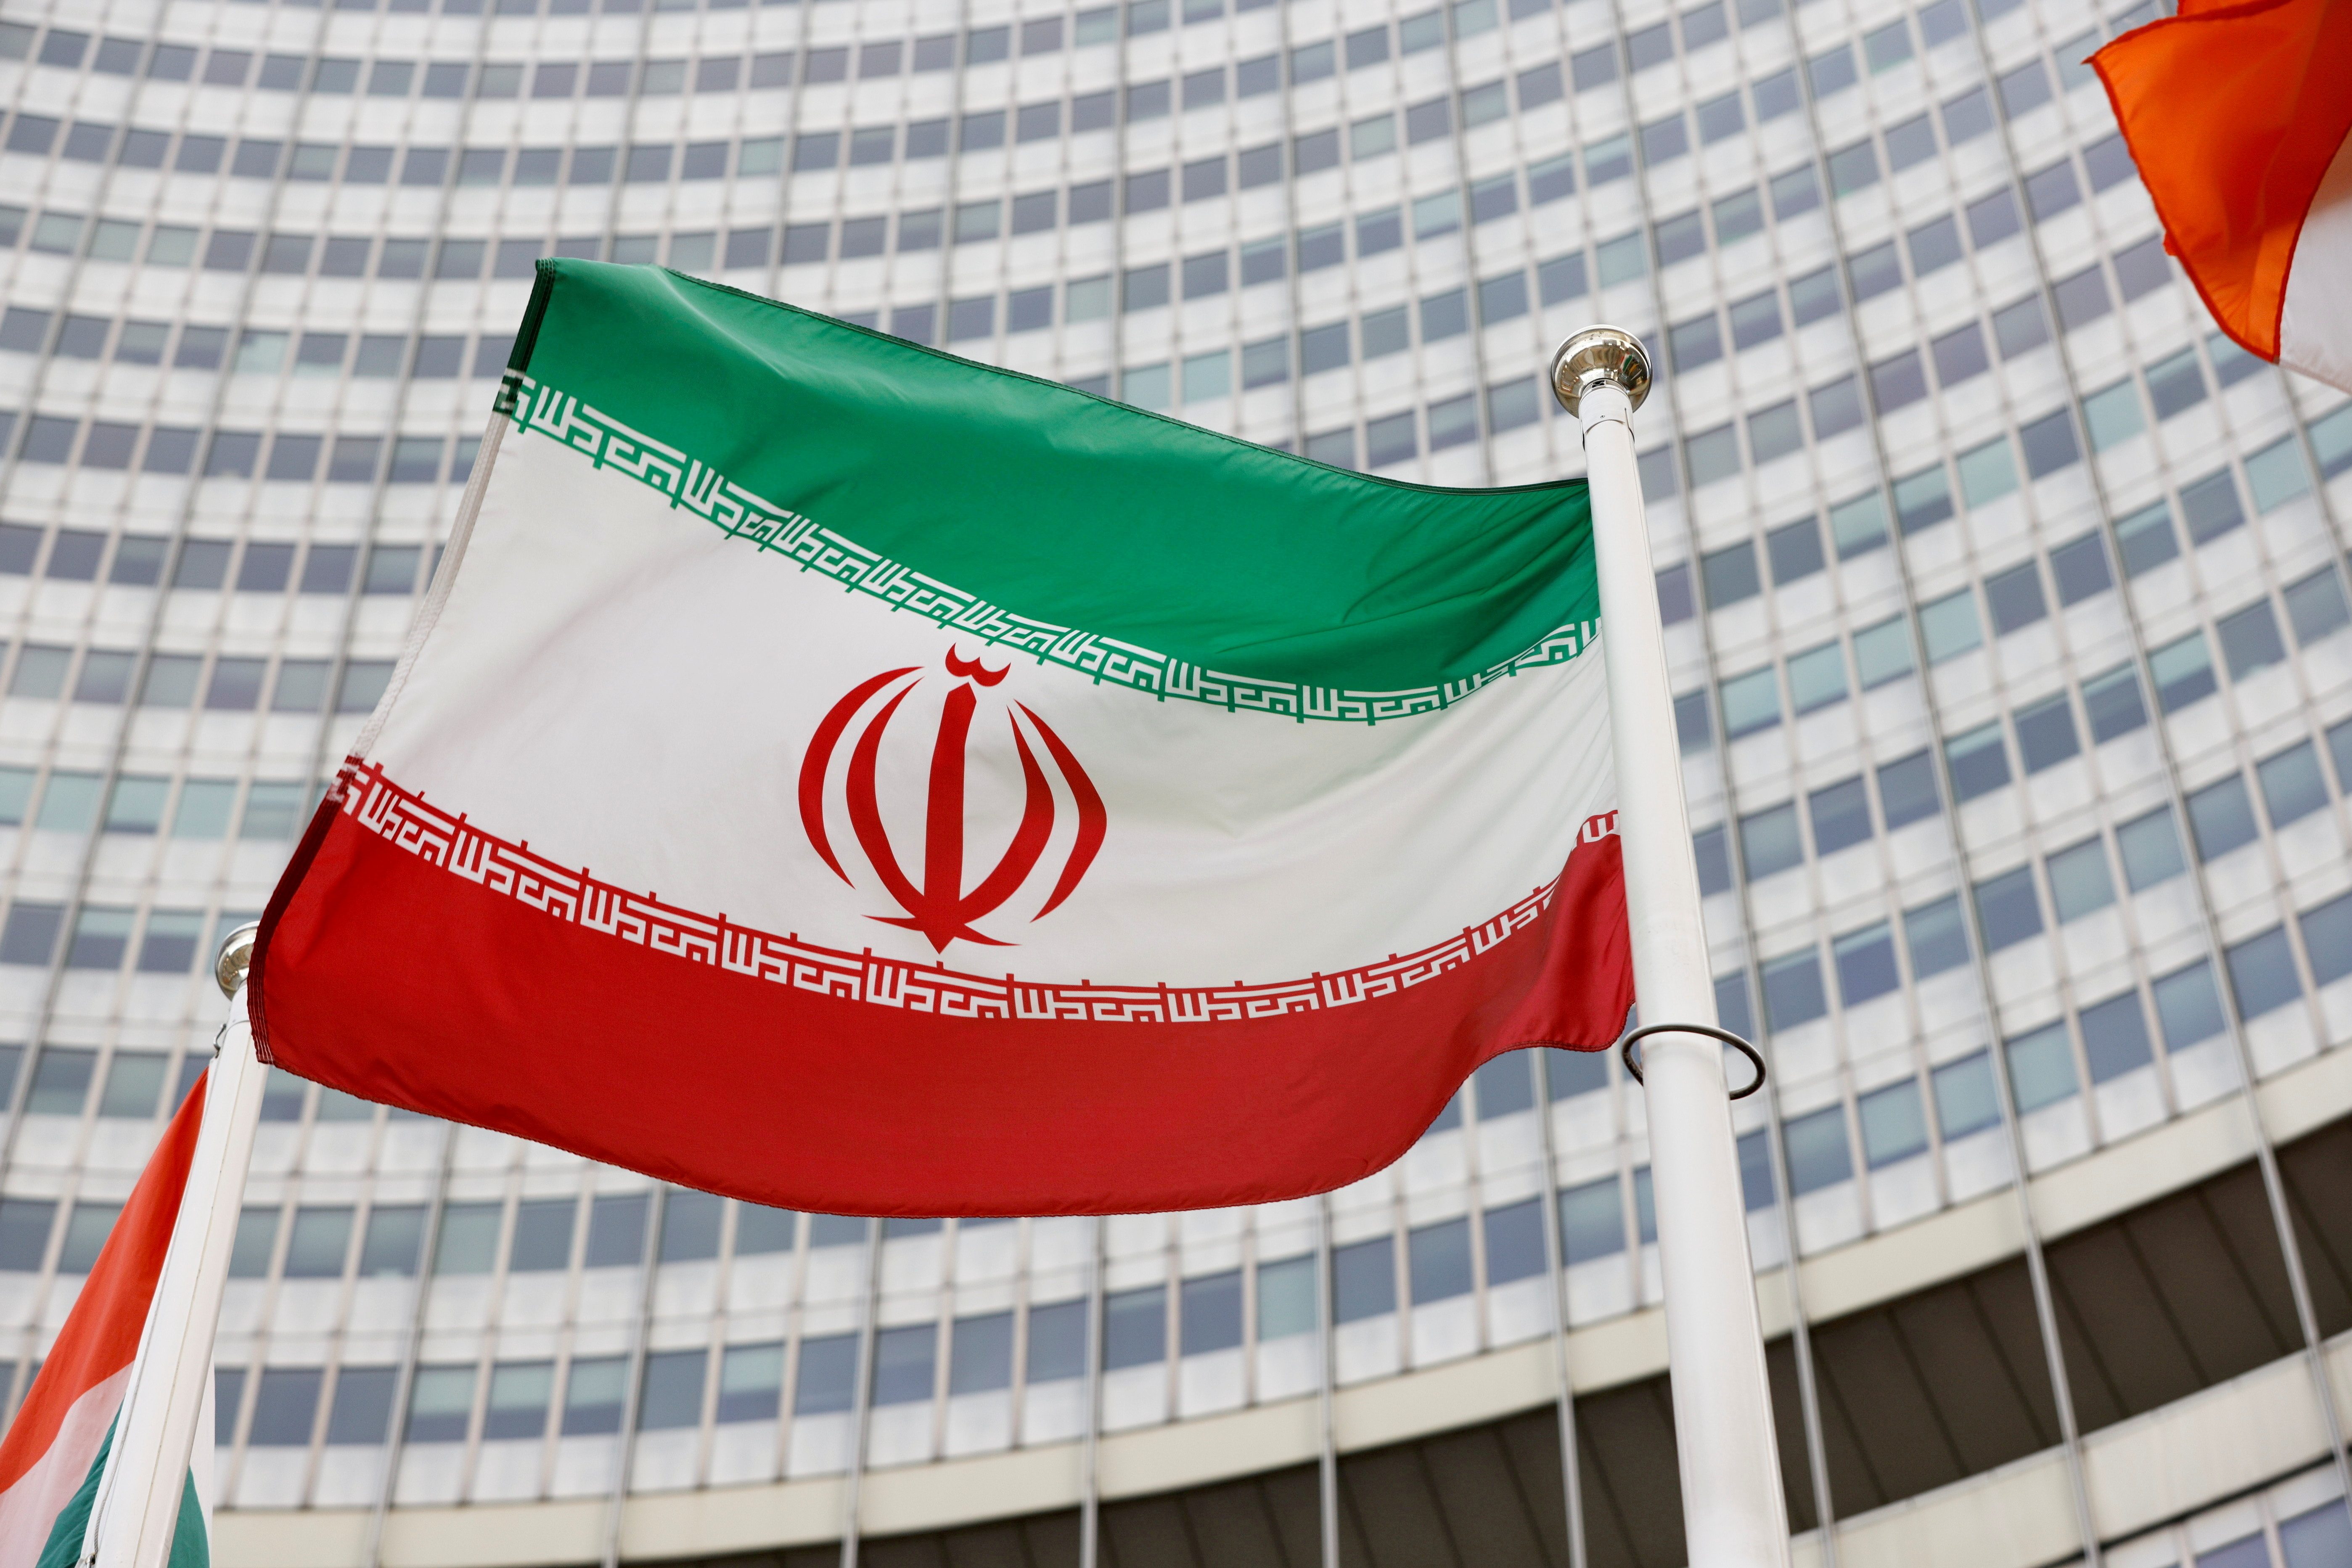 US to Iran: Grant inspectors access to workshop or face action at IAEA